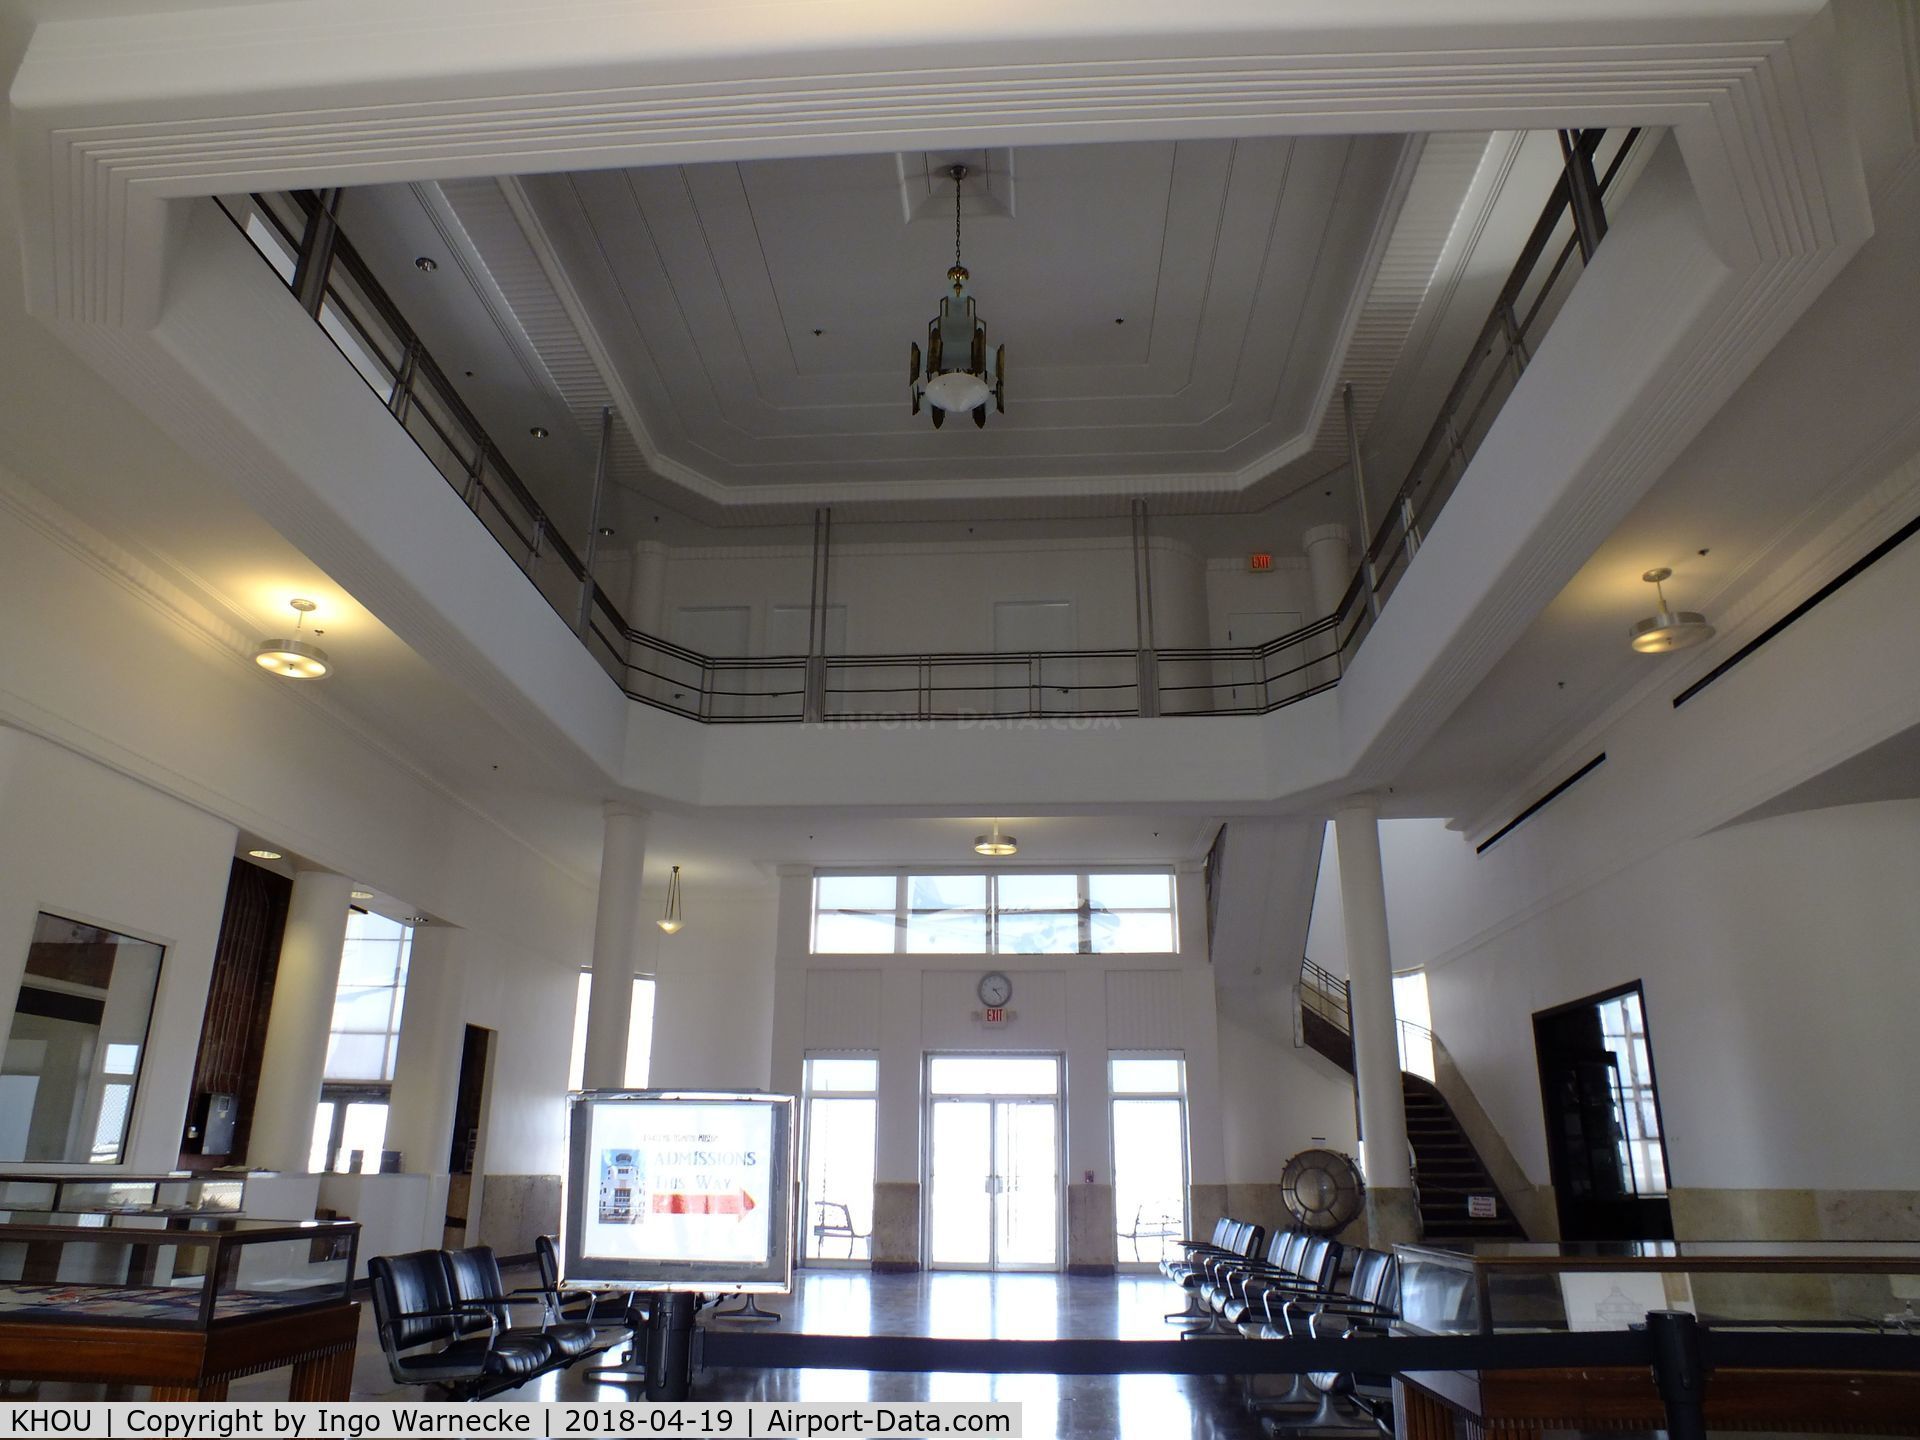 William P Hobby Airport (HOU) - the main hall of the Houston Municipal Airport terminal building - restored and maintained by volunteers and staff of the 1940 Air Terminal Museum